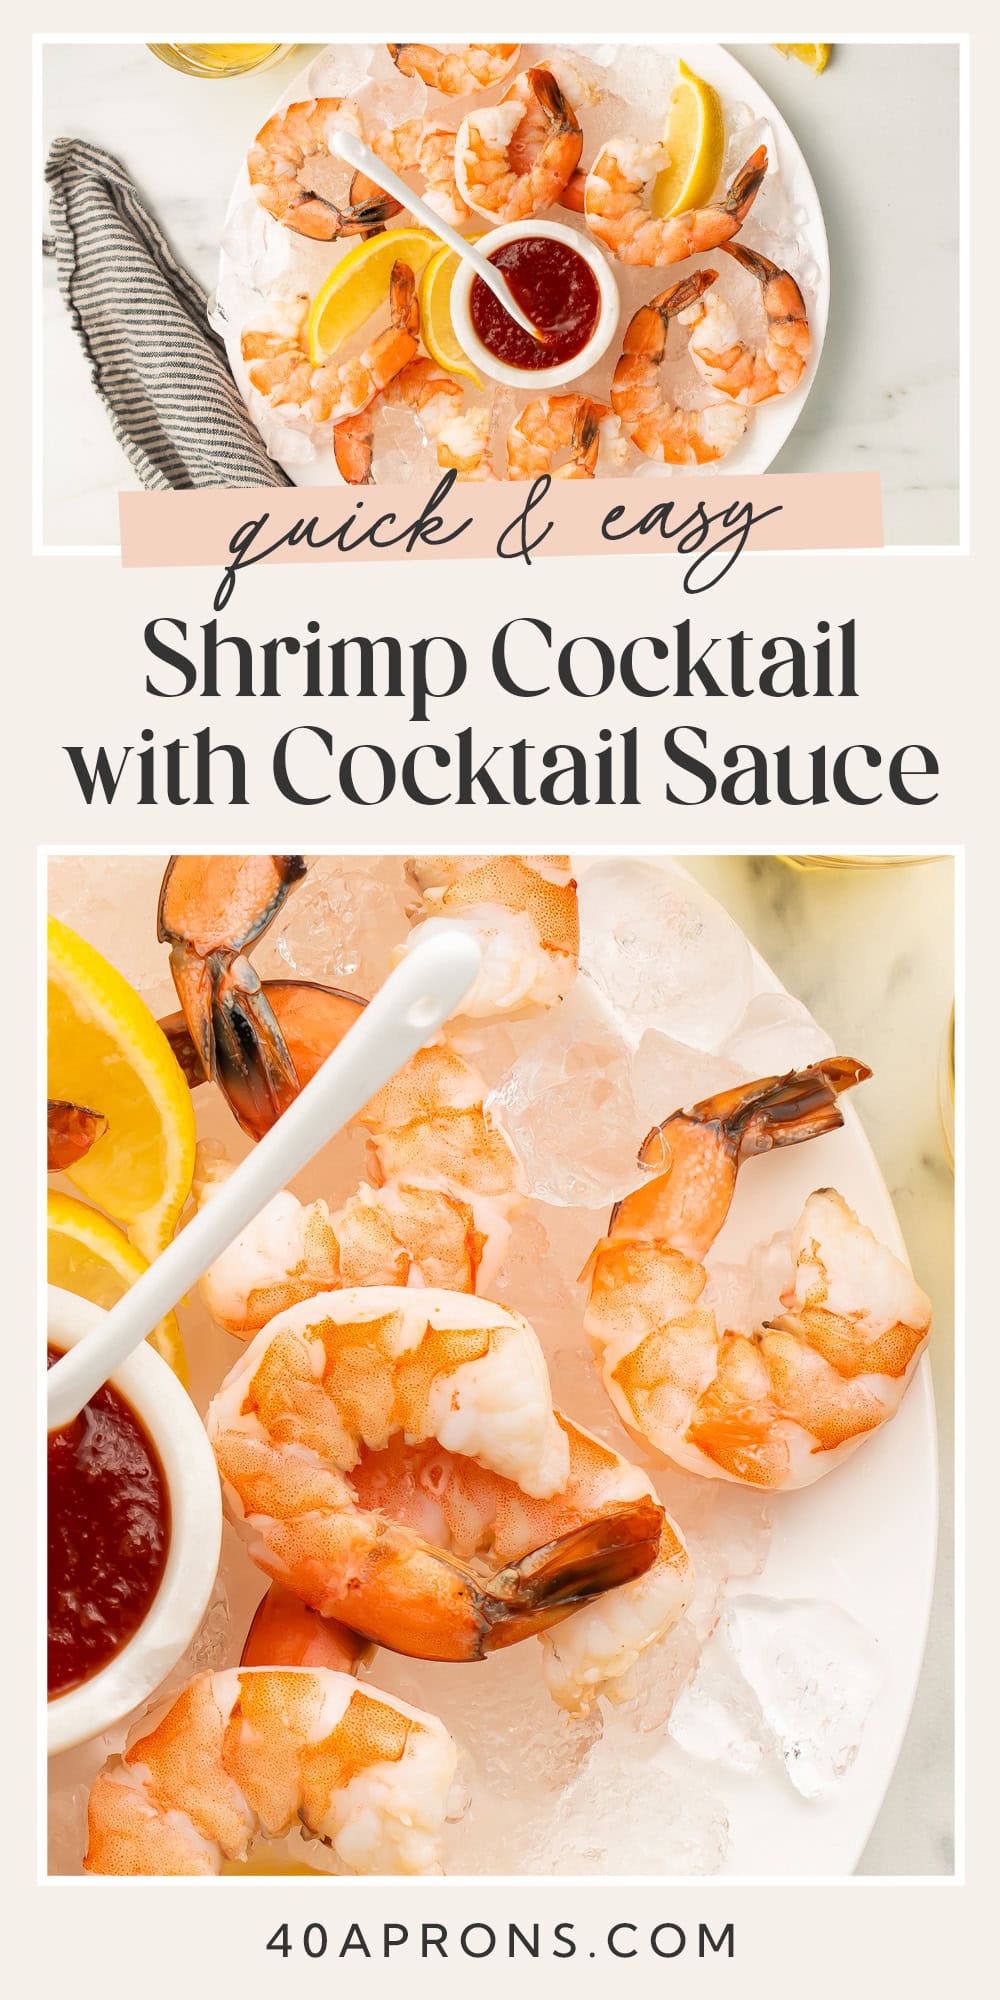 Pin graphic for shrimp cocktail.